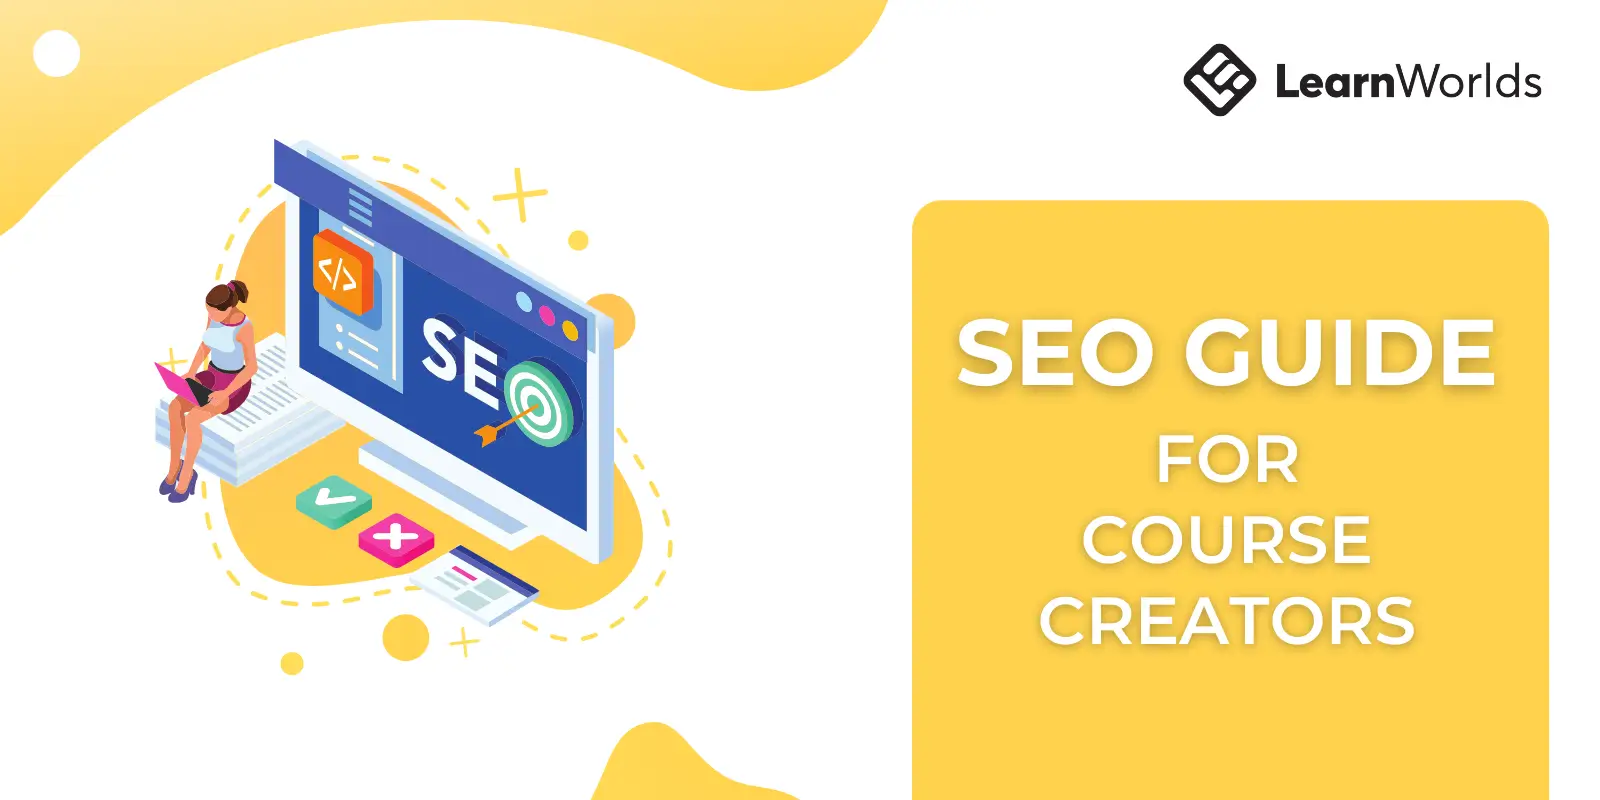 Course Creators Guide to SEO Success LearnWorlds Blog image